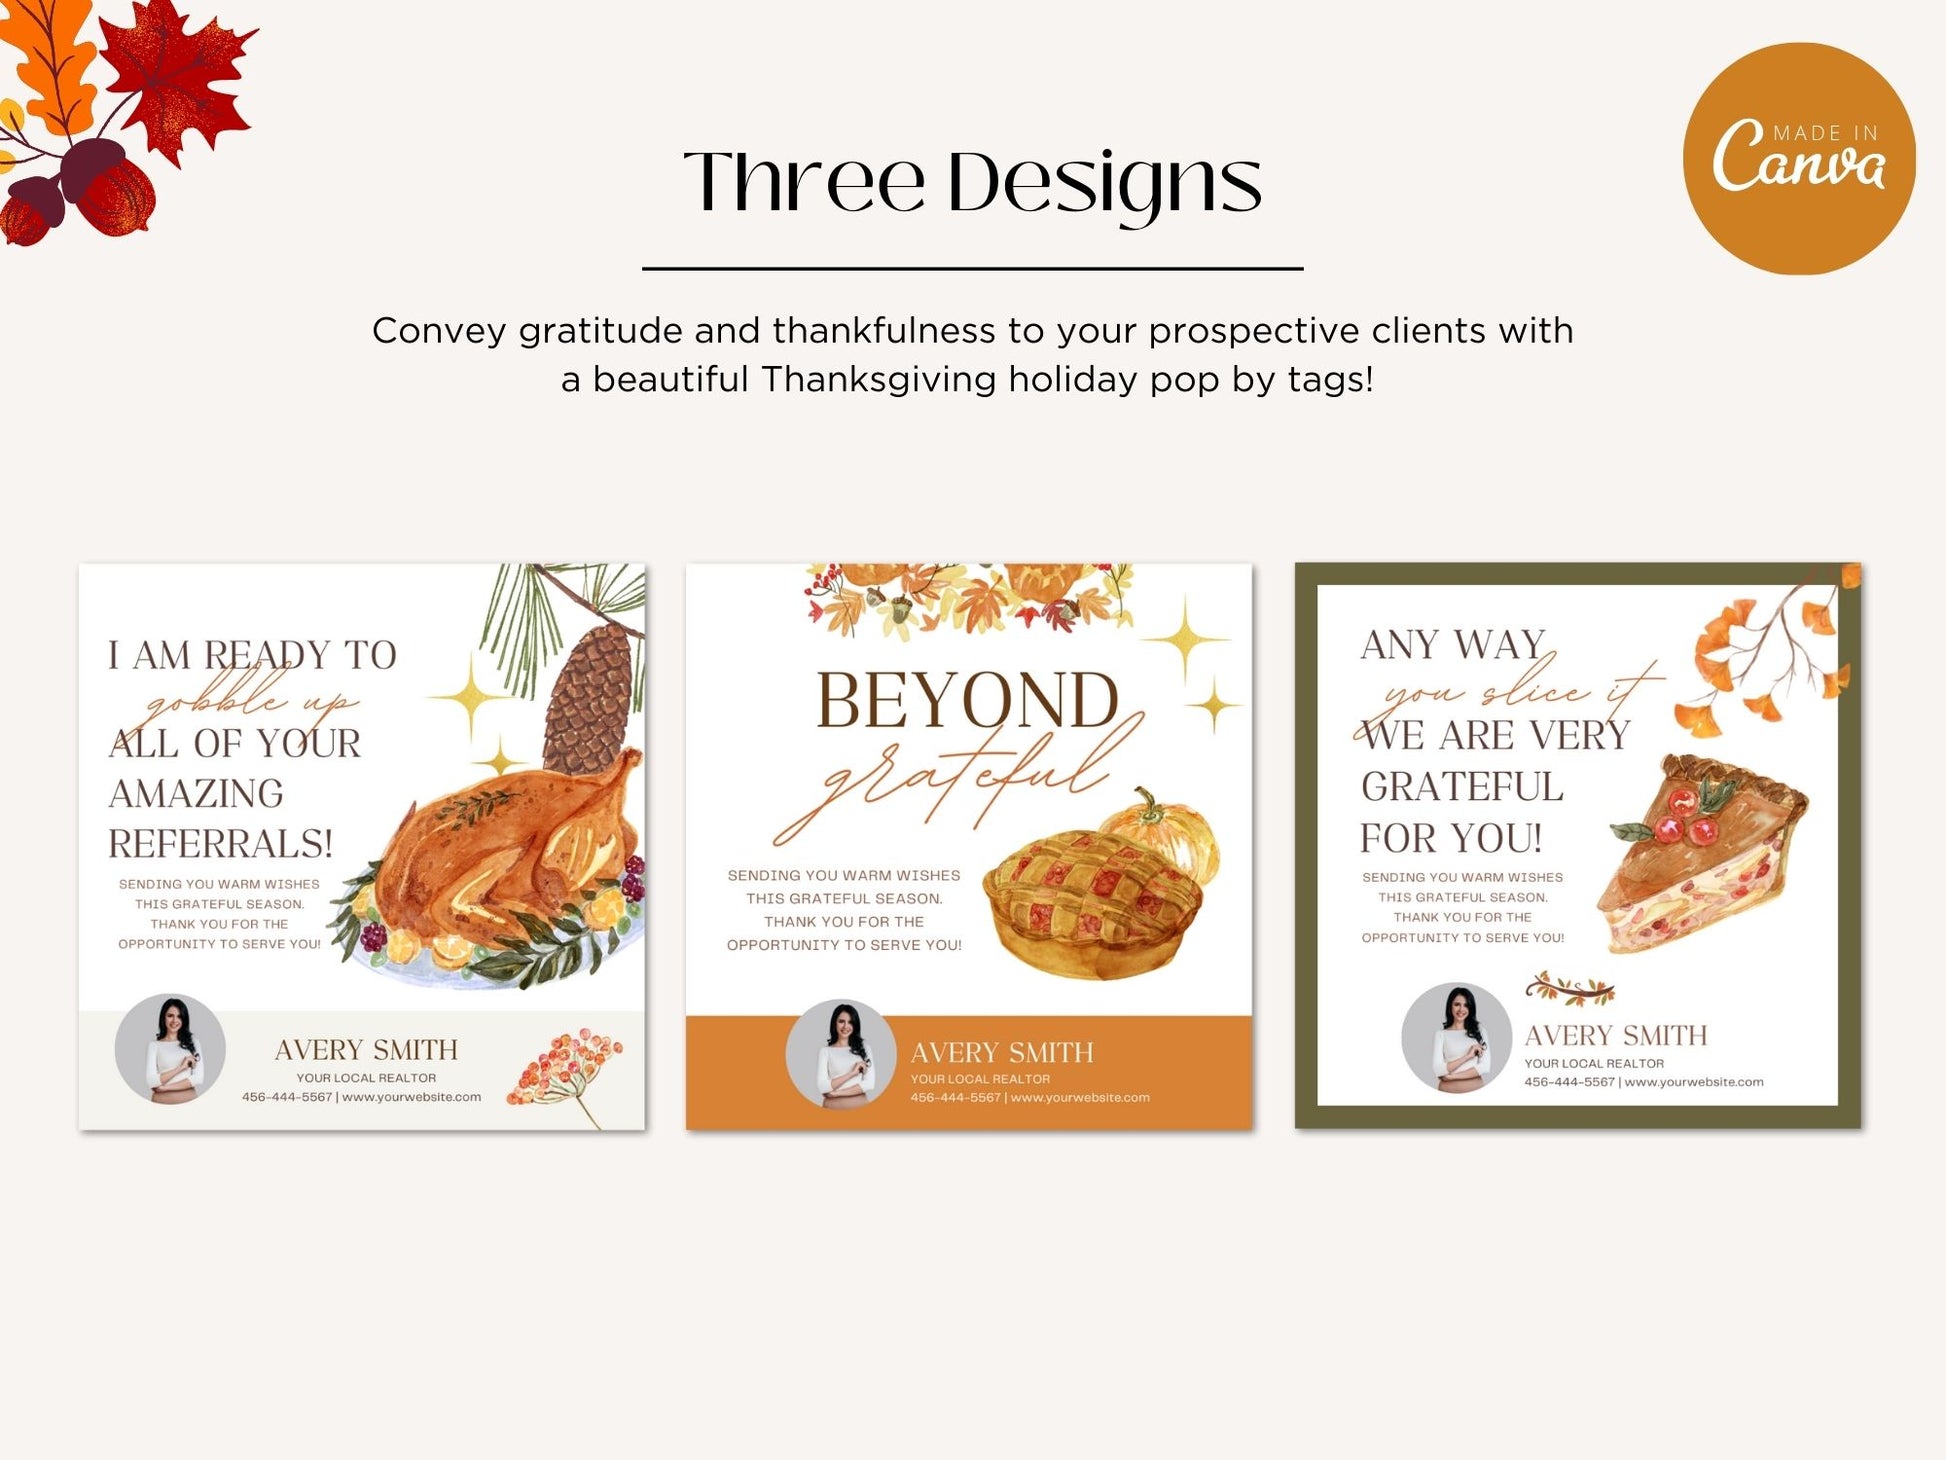 Real Estate Thanksgiving Pop By Tag Square Bundle - Personalize your pop-by gifts with these square tags, expressing gratitude and fostering connections with clients during the Thanksgiving holiday season.